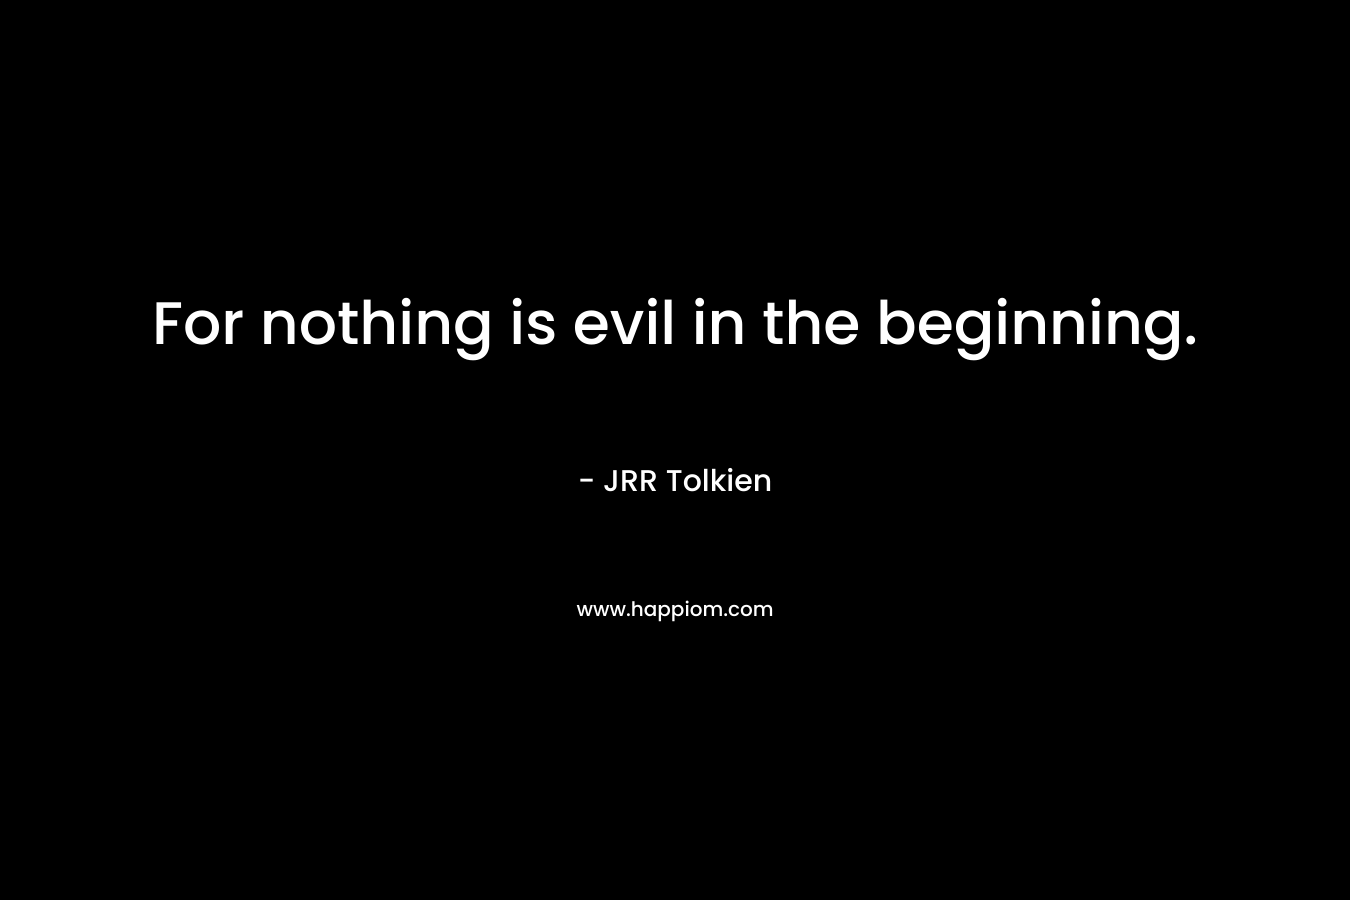 For nothing is evil in the beginning.